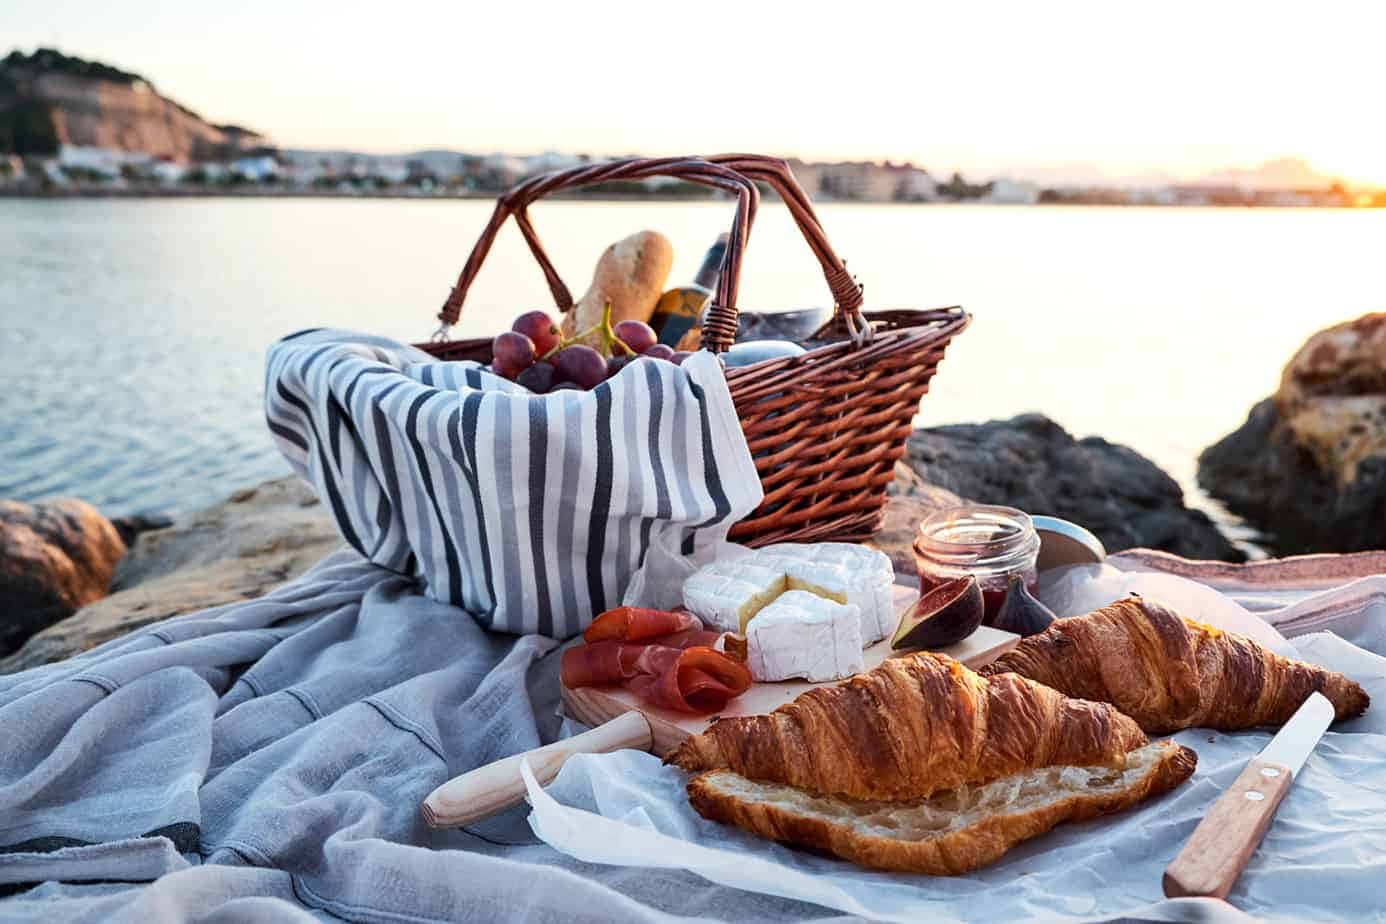 Picnic Set Up With Ocean View Picture